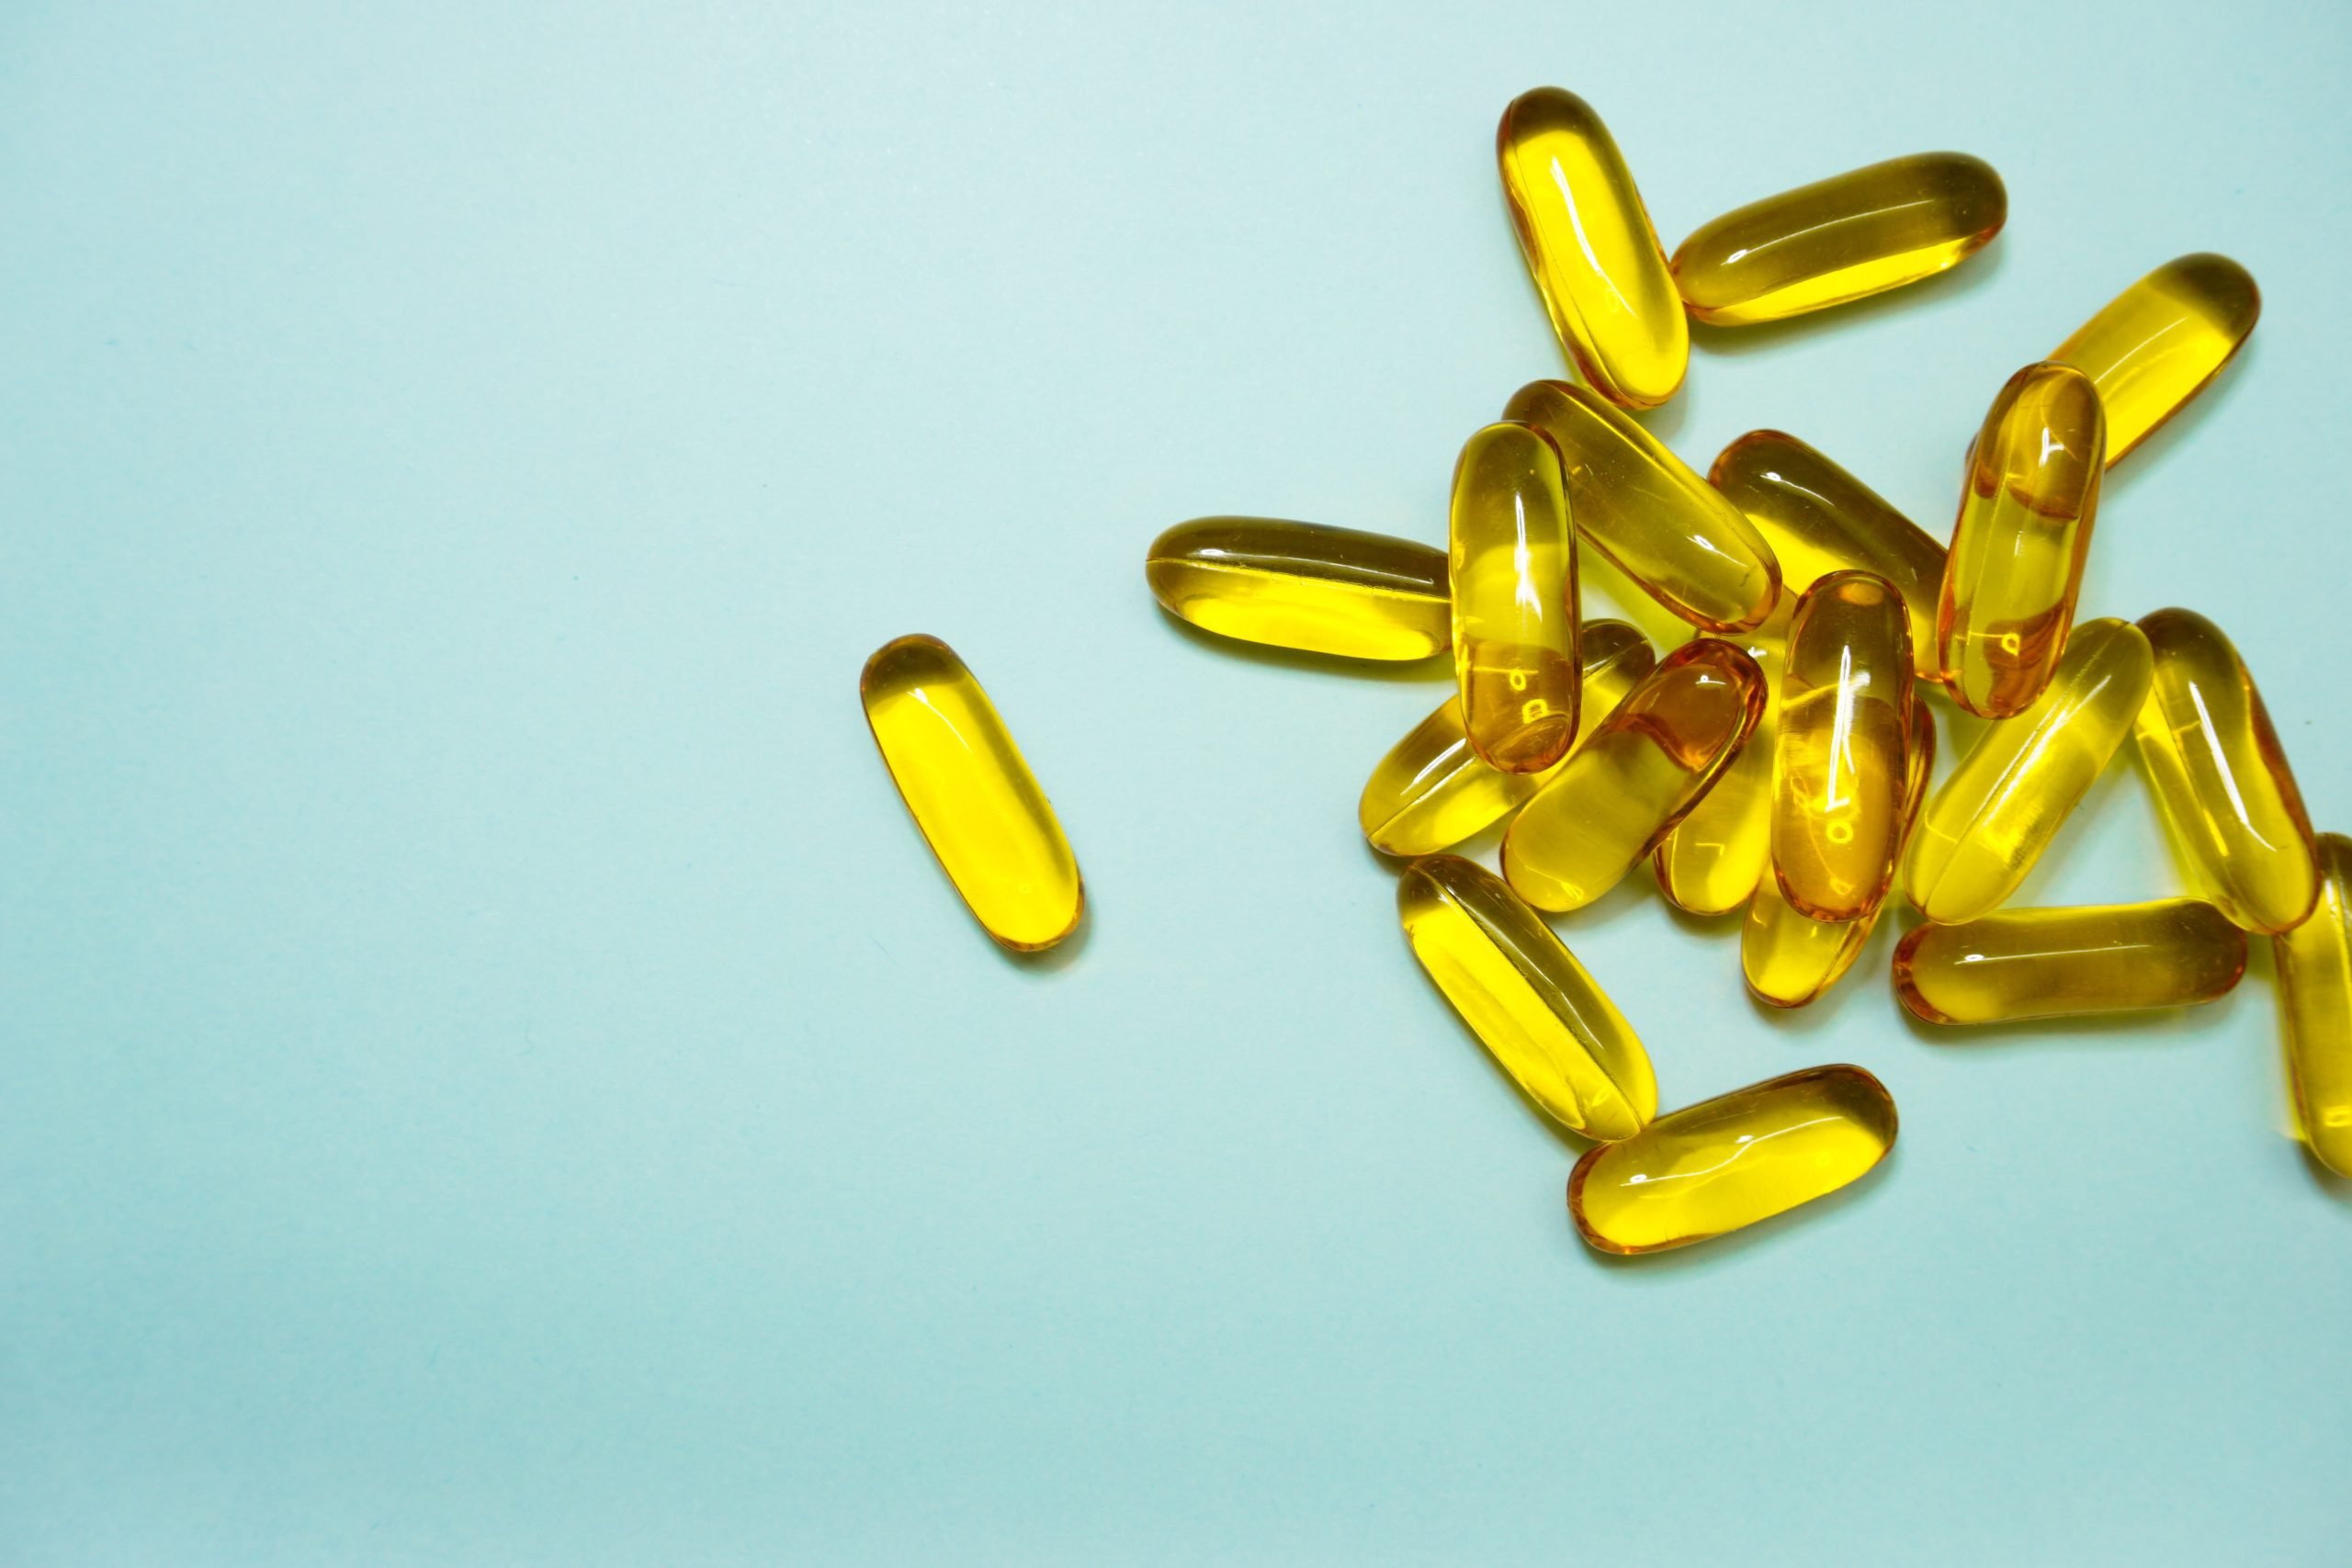 This image shows a bottle of omega-3 supplements, which are a source of these essential fatty acids. Omega-3s are known for their numerous health benefits, including their ability to support brain function, heart health, and reduce inflammation in the body. They can be found in a variety of dietary sources, including fatty fish, nuts and seeds, and plant-based oils. Incorporating omega-3s into the diet can have a positive impact on overall health and well-being.